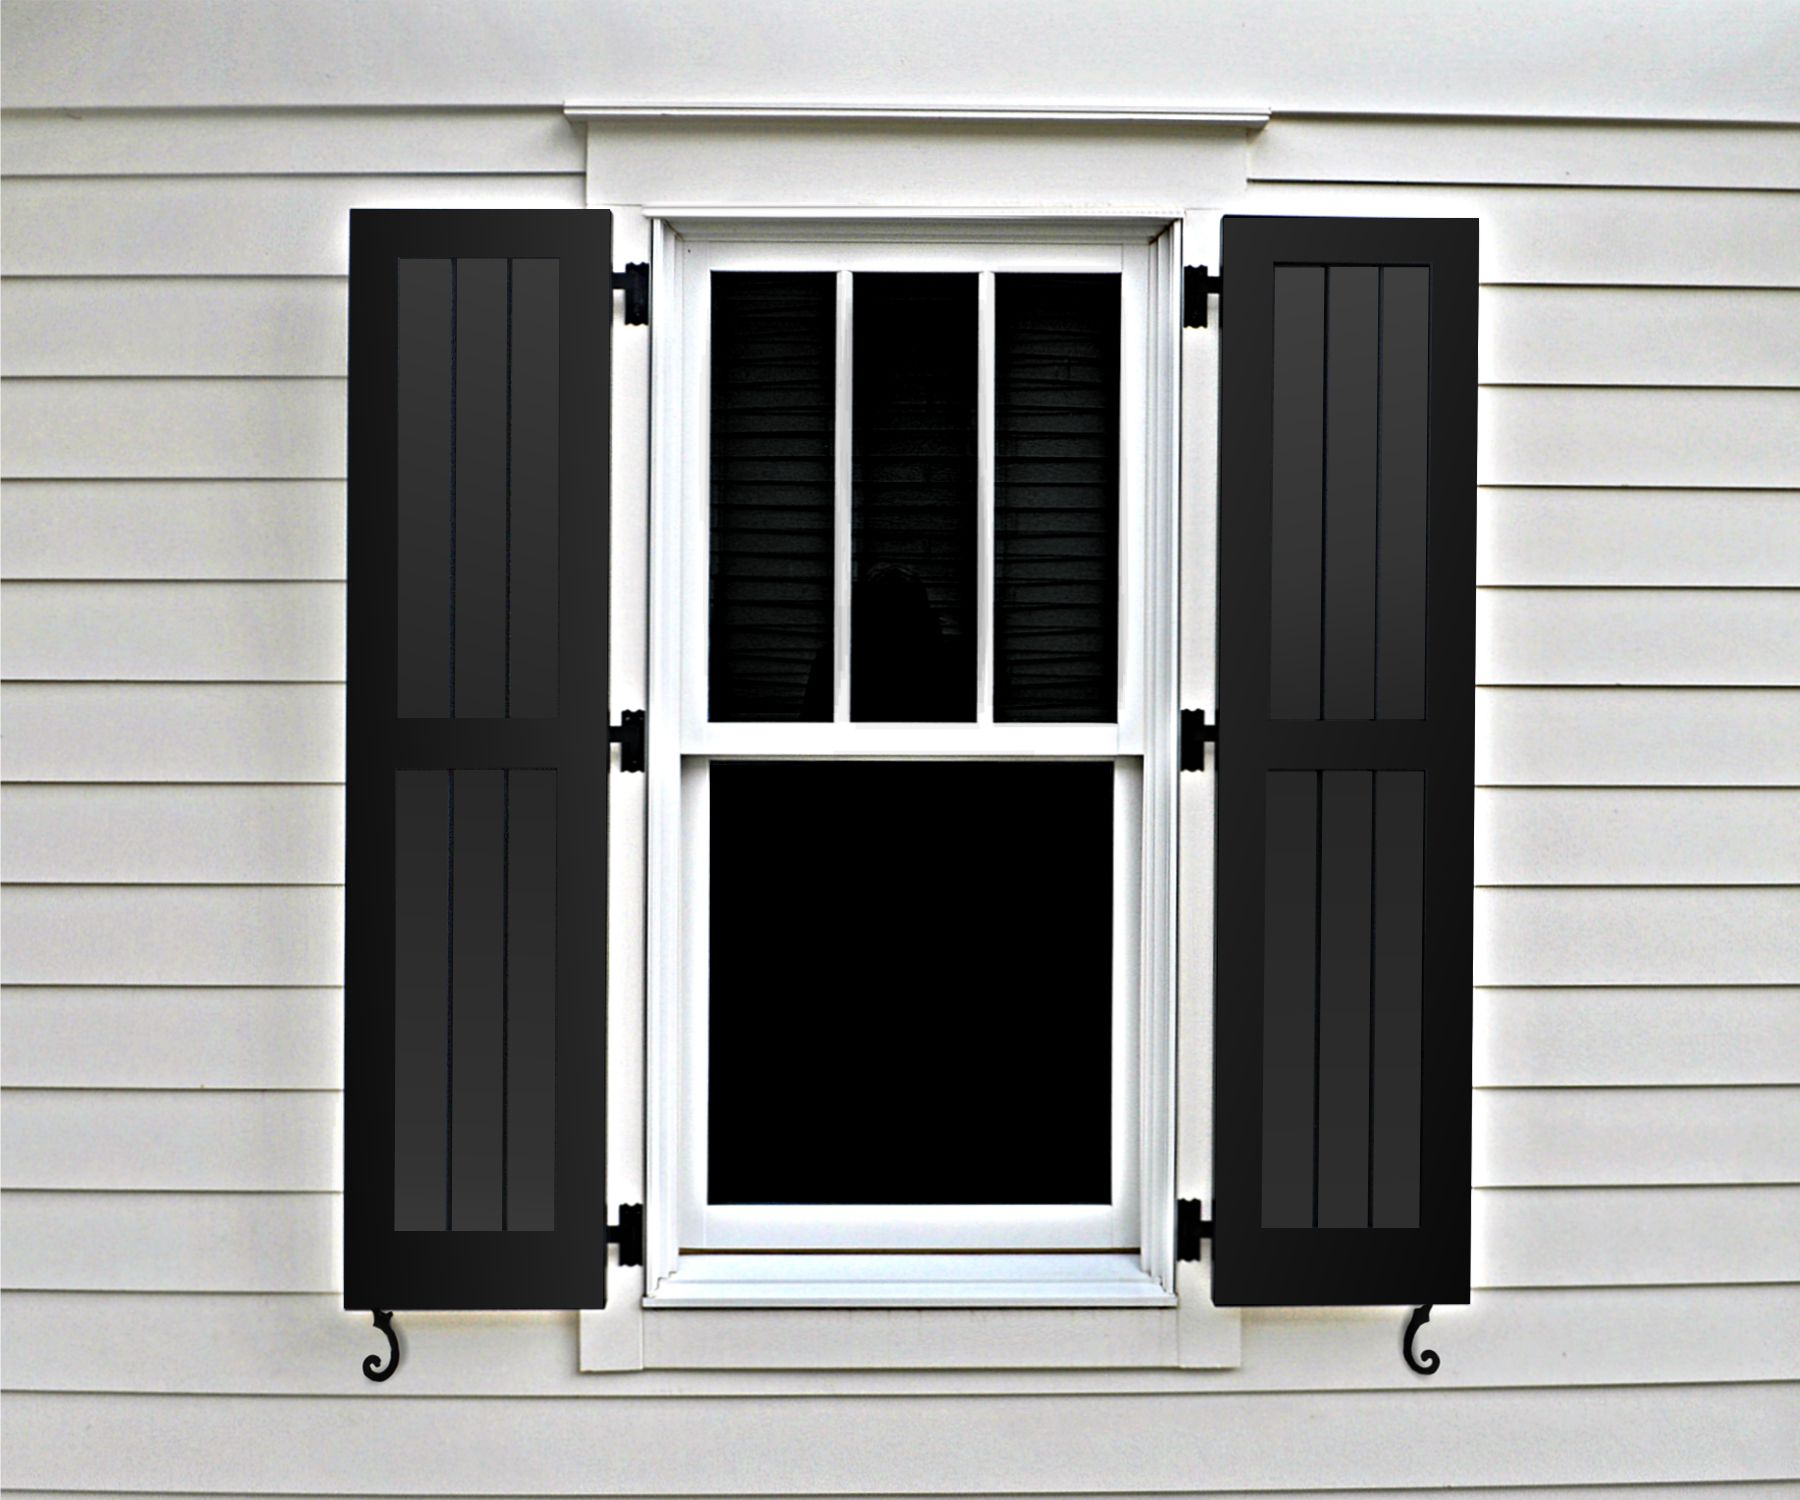 Harmony shutters for windows that are affordable.